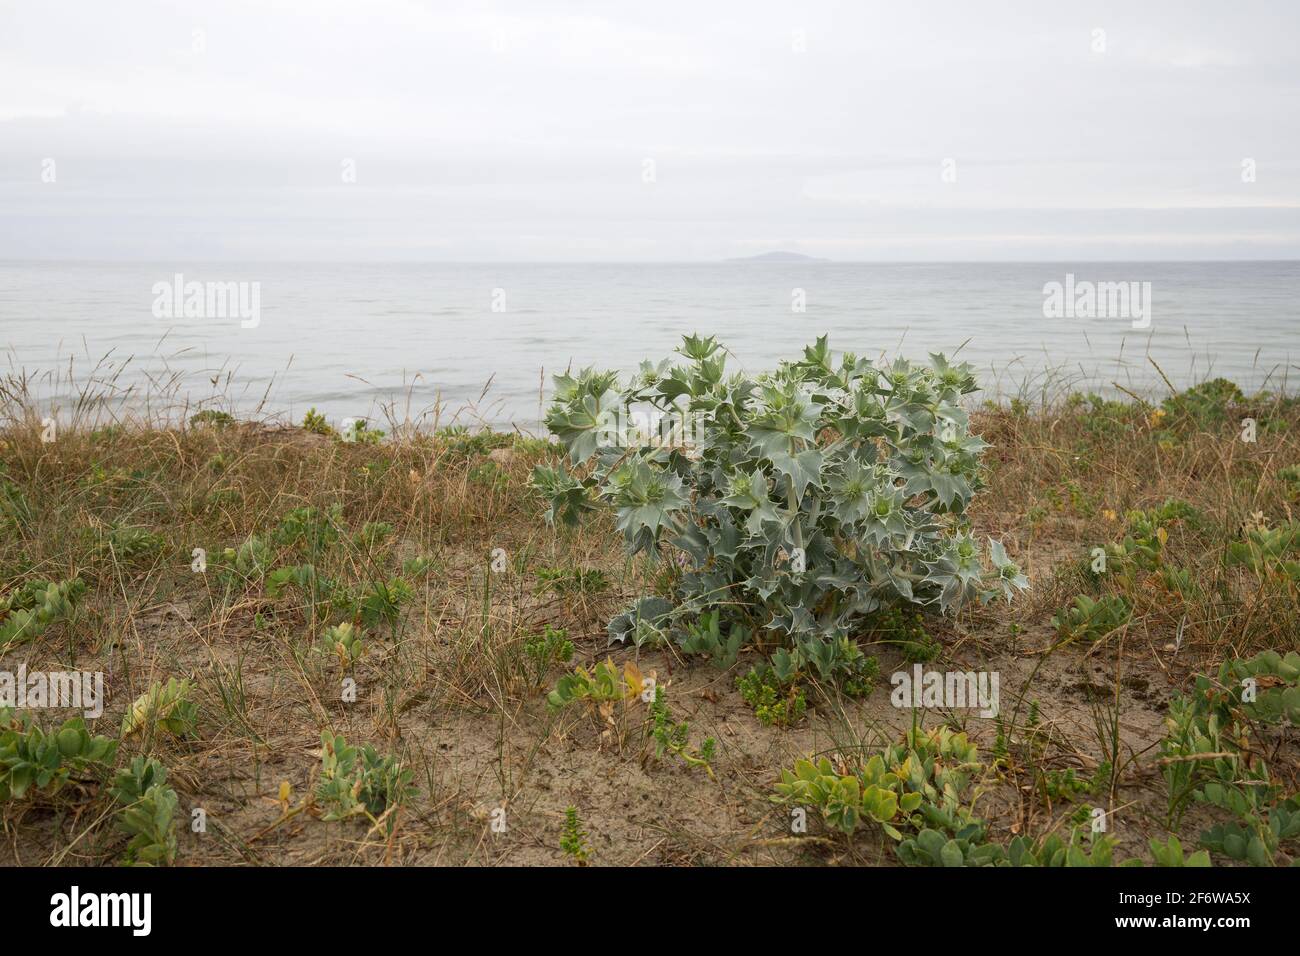 Sea holly, Eryngium maritimum growing in dry environment, ocean in the background Stock Photo